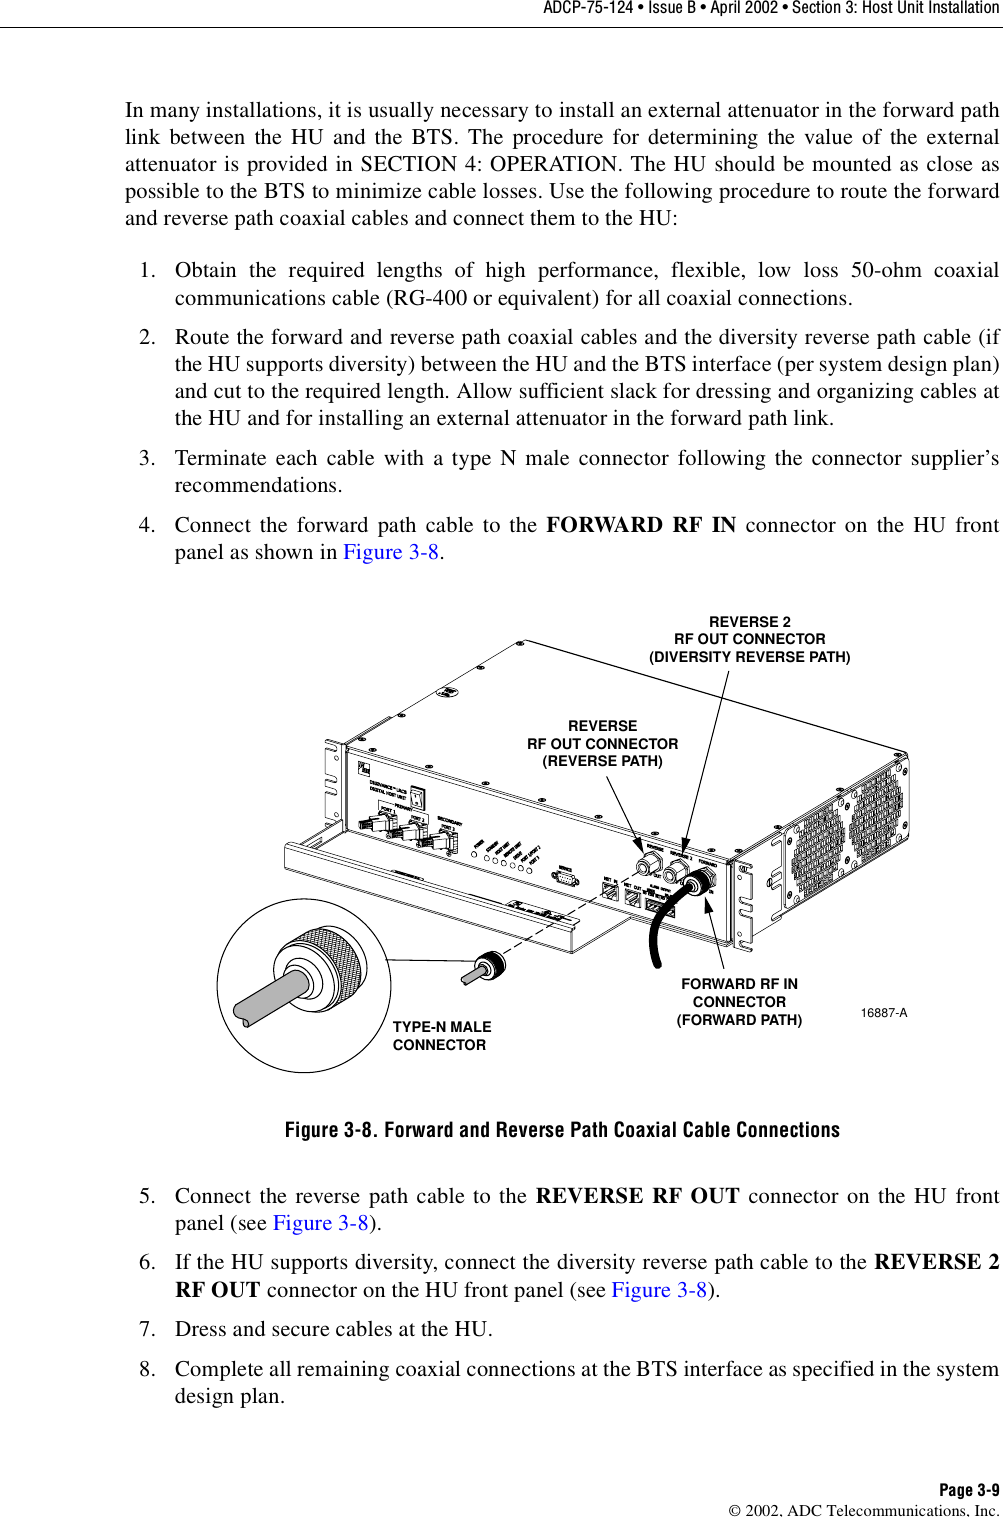 ADCP-75-124 • Issue B • April 2002 • Section 3: Host Unit InstallationPage 3-9©2002, ADC Telecommunications, Inc.In many installations, it is usually necessary to install an external attenuator in the forward pathlink between the HU and the BTS. The procedure for determining the value of the externalattenuator is provided in SECTION 4: OPERATION. The HU should be mounted as close aspossible to the BTS to minimize cable losses. Use the following procedure to route the forwardand reverse path coaxial cables and connect them to the HU:1. Obtain the required lengths of high performance, flexible, low loss 50-ohm coaxialcommunications cable (RG-400 or equivalent) for all coaxial connections.2. Route the forward and reverse path coaxial cables and the diversity reverse path cable (ifthe HU supports diversity) between the HU and the BTS interface (per system design plan)and cut to the required length. Allow sufficient slack for dressing and organizing cables atthe HU and for installing an external attenuator in the forward path link.3. Terminate each cable with atype Nmale connector following the connector supplier’srecommendations.4. Connect the forward path cable to the FORWARD RF IN connector on the HU frontpanel as shown in Figure 3-8.Figure 3-8. Forward and Reverse Path Coaxial Cable Connections5. Connect the reverse path cable to the REVERSE RF OUT connector on the HU frontpanel (see Figure 3-8).6. If the HU supports diversity, connect the diversity reverse path cable to the REVERSE 2RF OUT connector on the HU front panel (see Figure 3-8).7. Dress and secure cables at the HU.8. Complete all remaining coaxial connections at the BTS interface as specified in the systemdesign plan.16887-ATYPE-N MALECONNECTORFORWARD RF INCONNECTOR(FORWARD PATH)REVERSERF OUT CONNECTOR(REVERSE PATH)REVERSE 2RF OUT CONNECTOR(DIVERSITY REVERSE PATH)